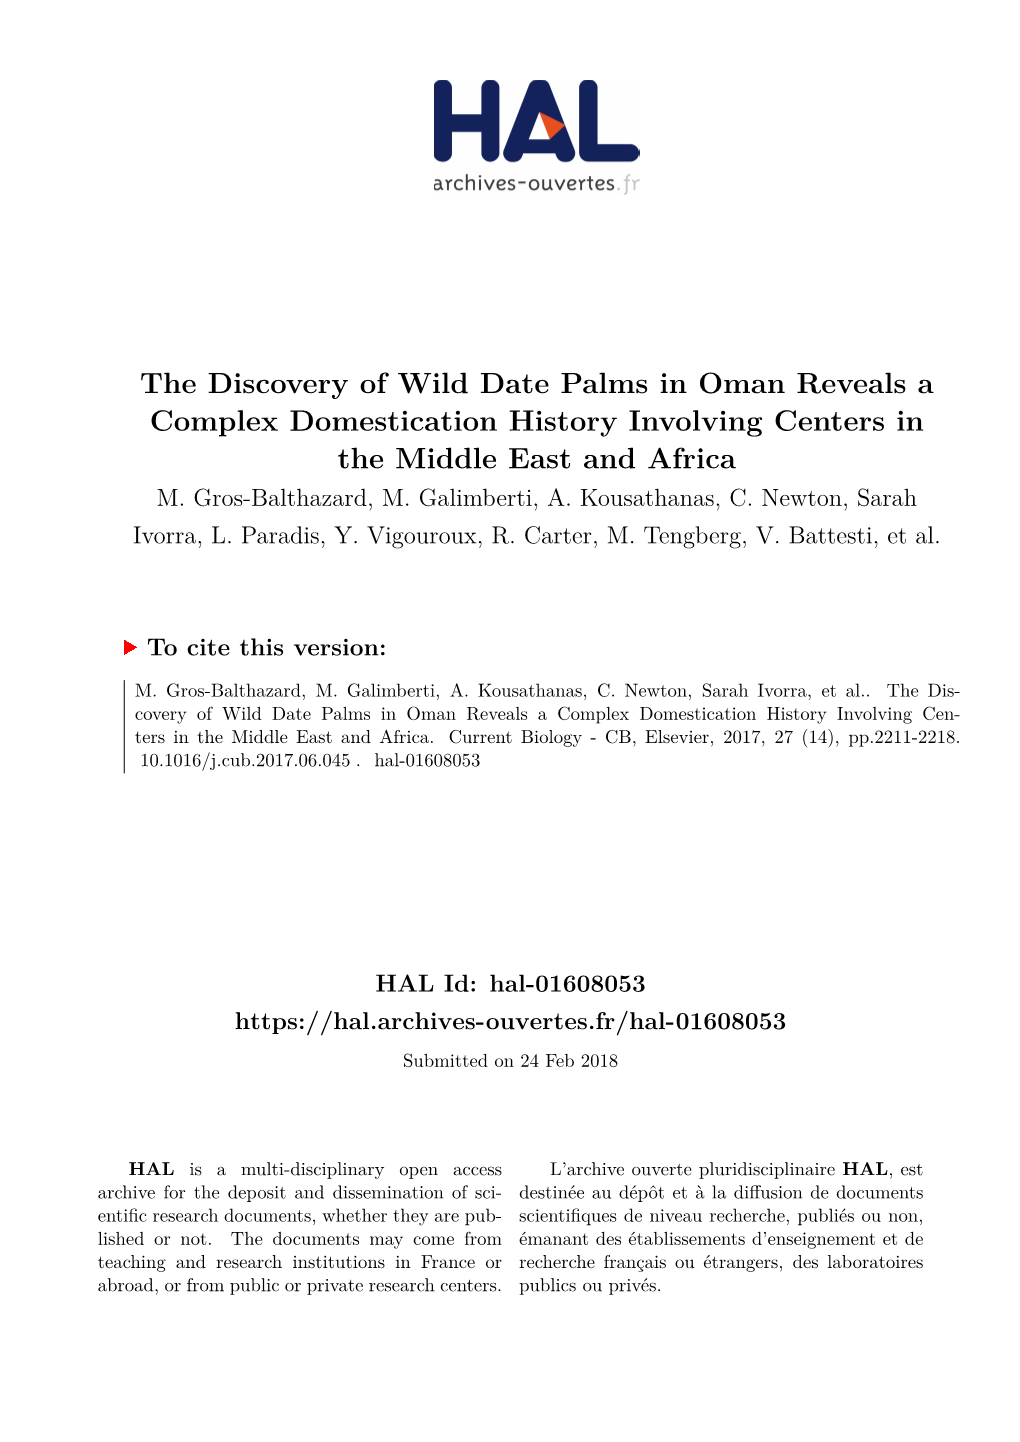 The Discovery of Wild Date Pal